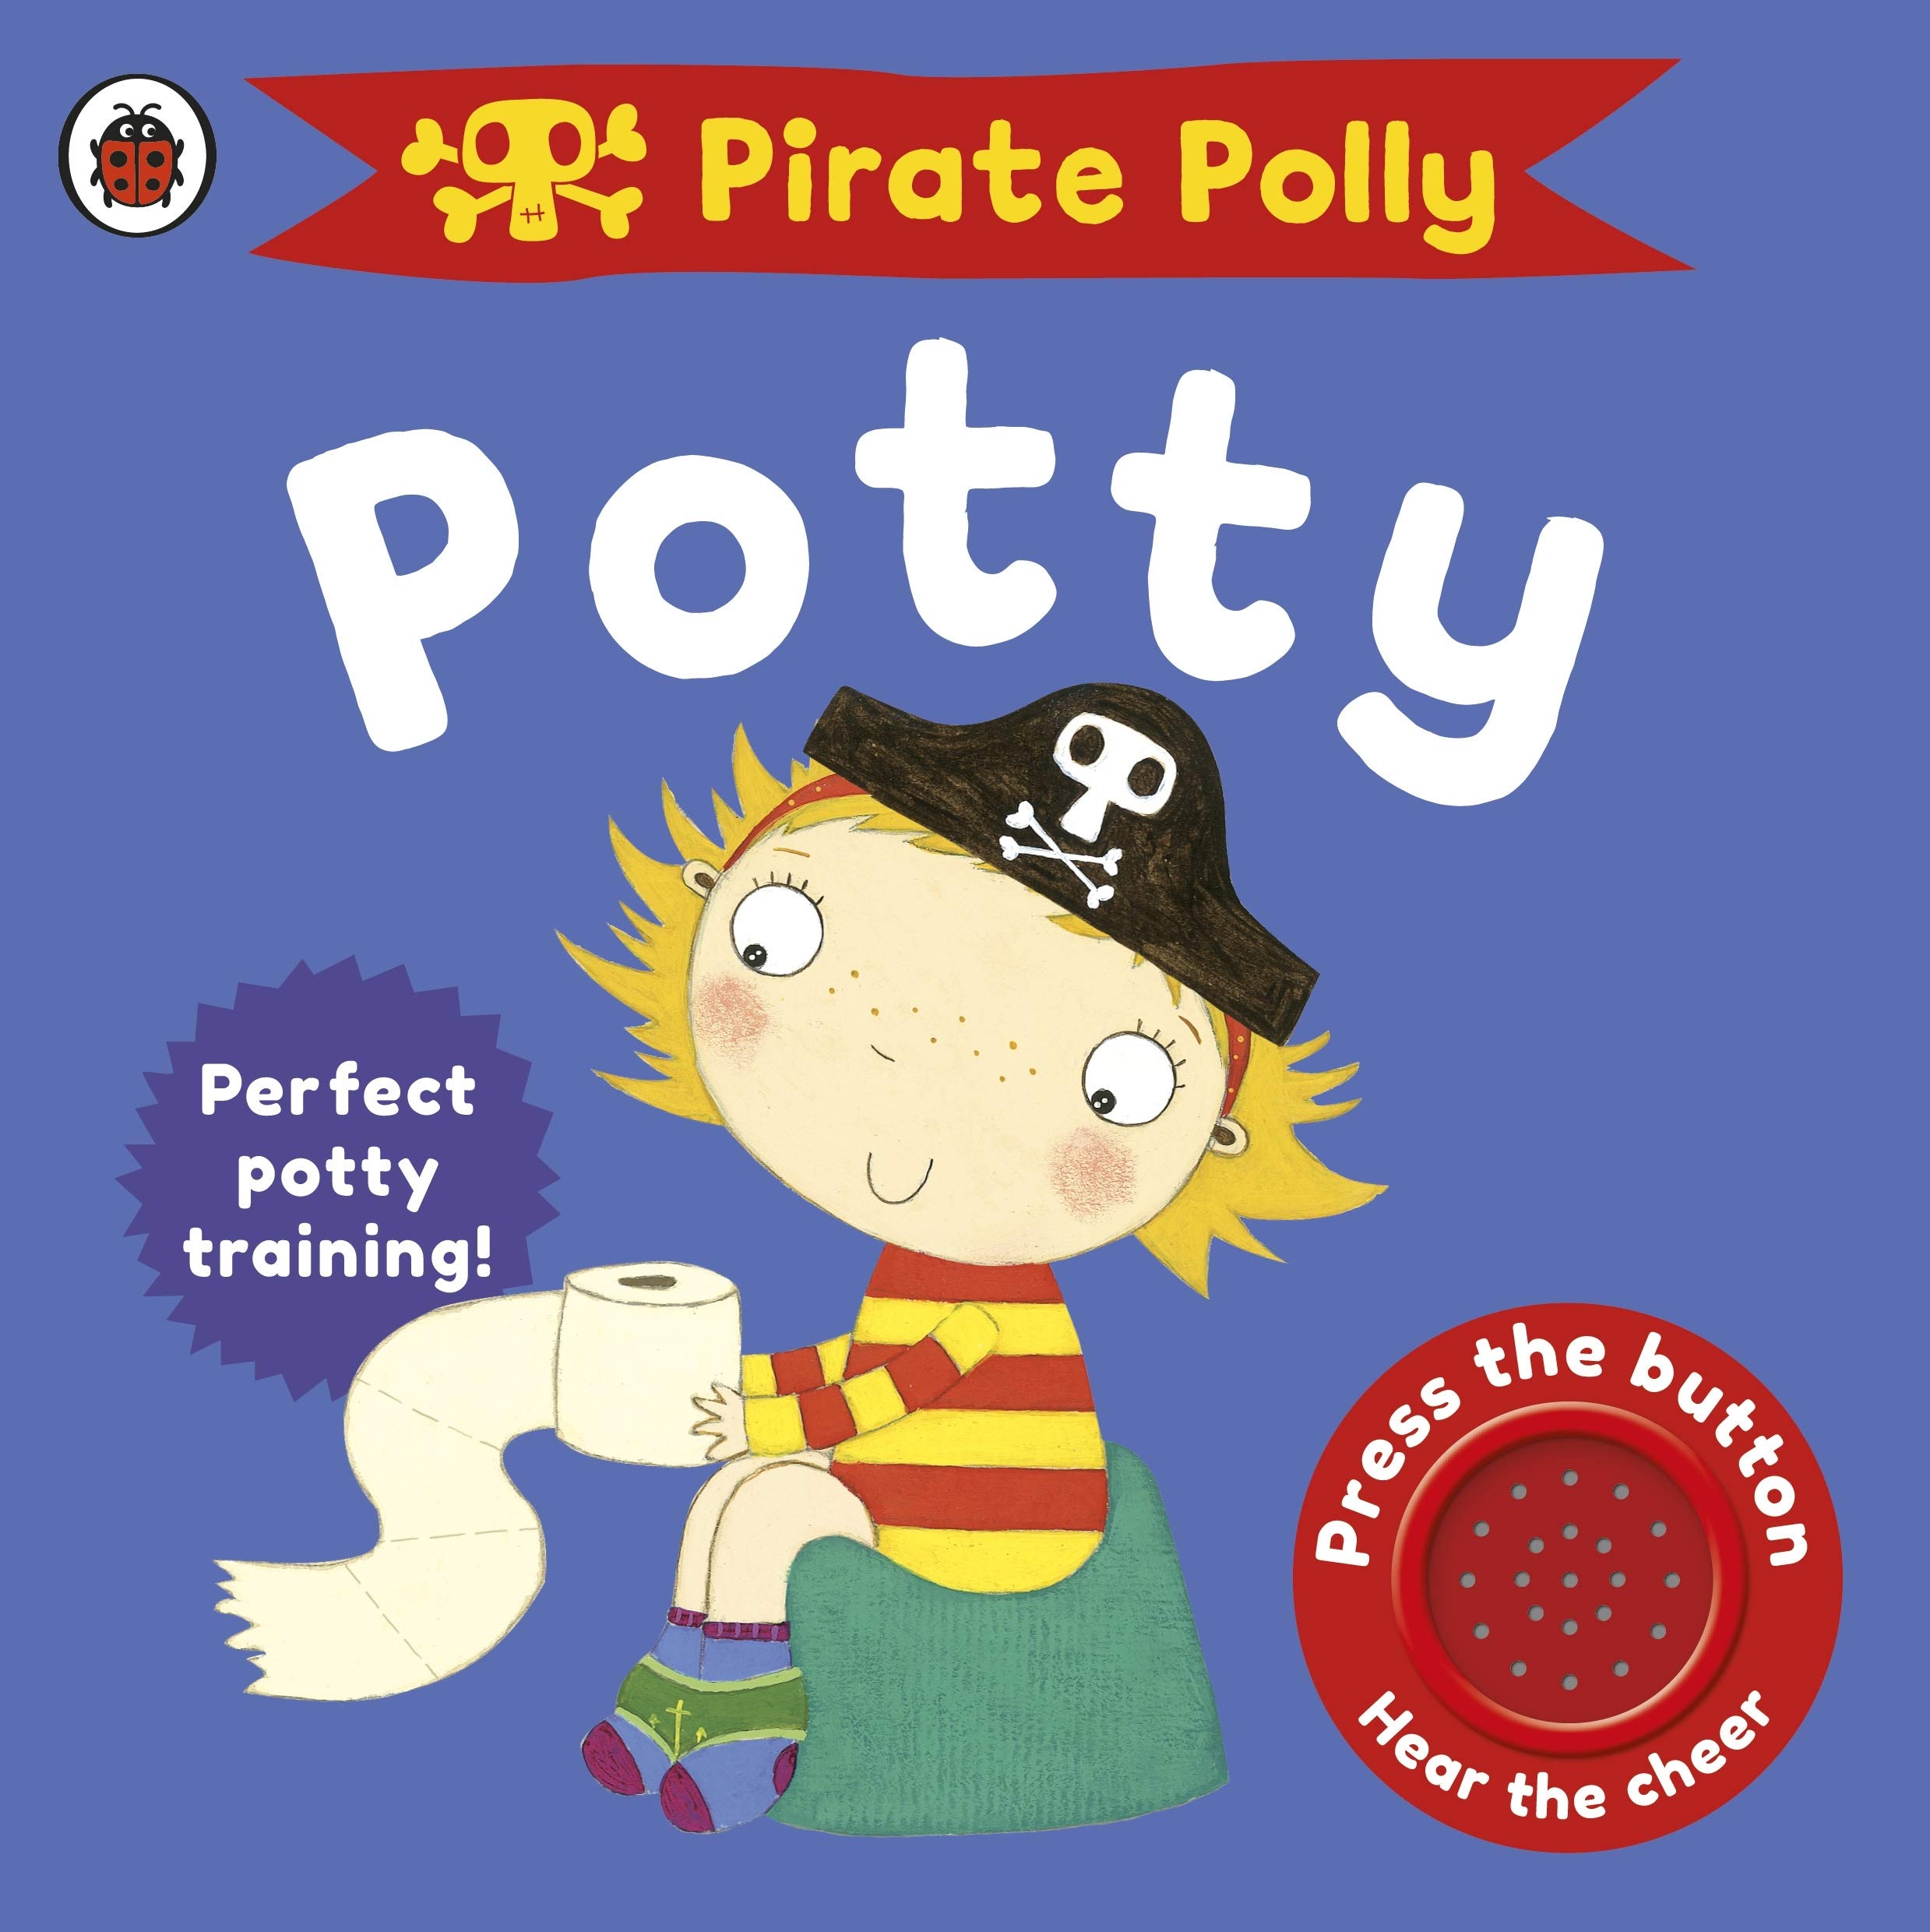 front cover of the potty training book 'pirate polly’s potty' for toddlers